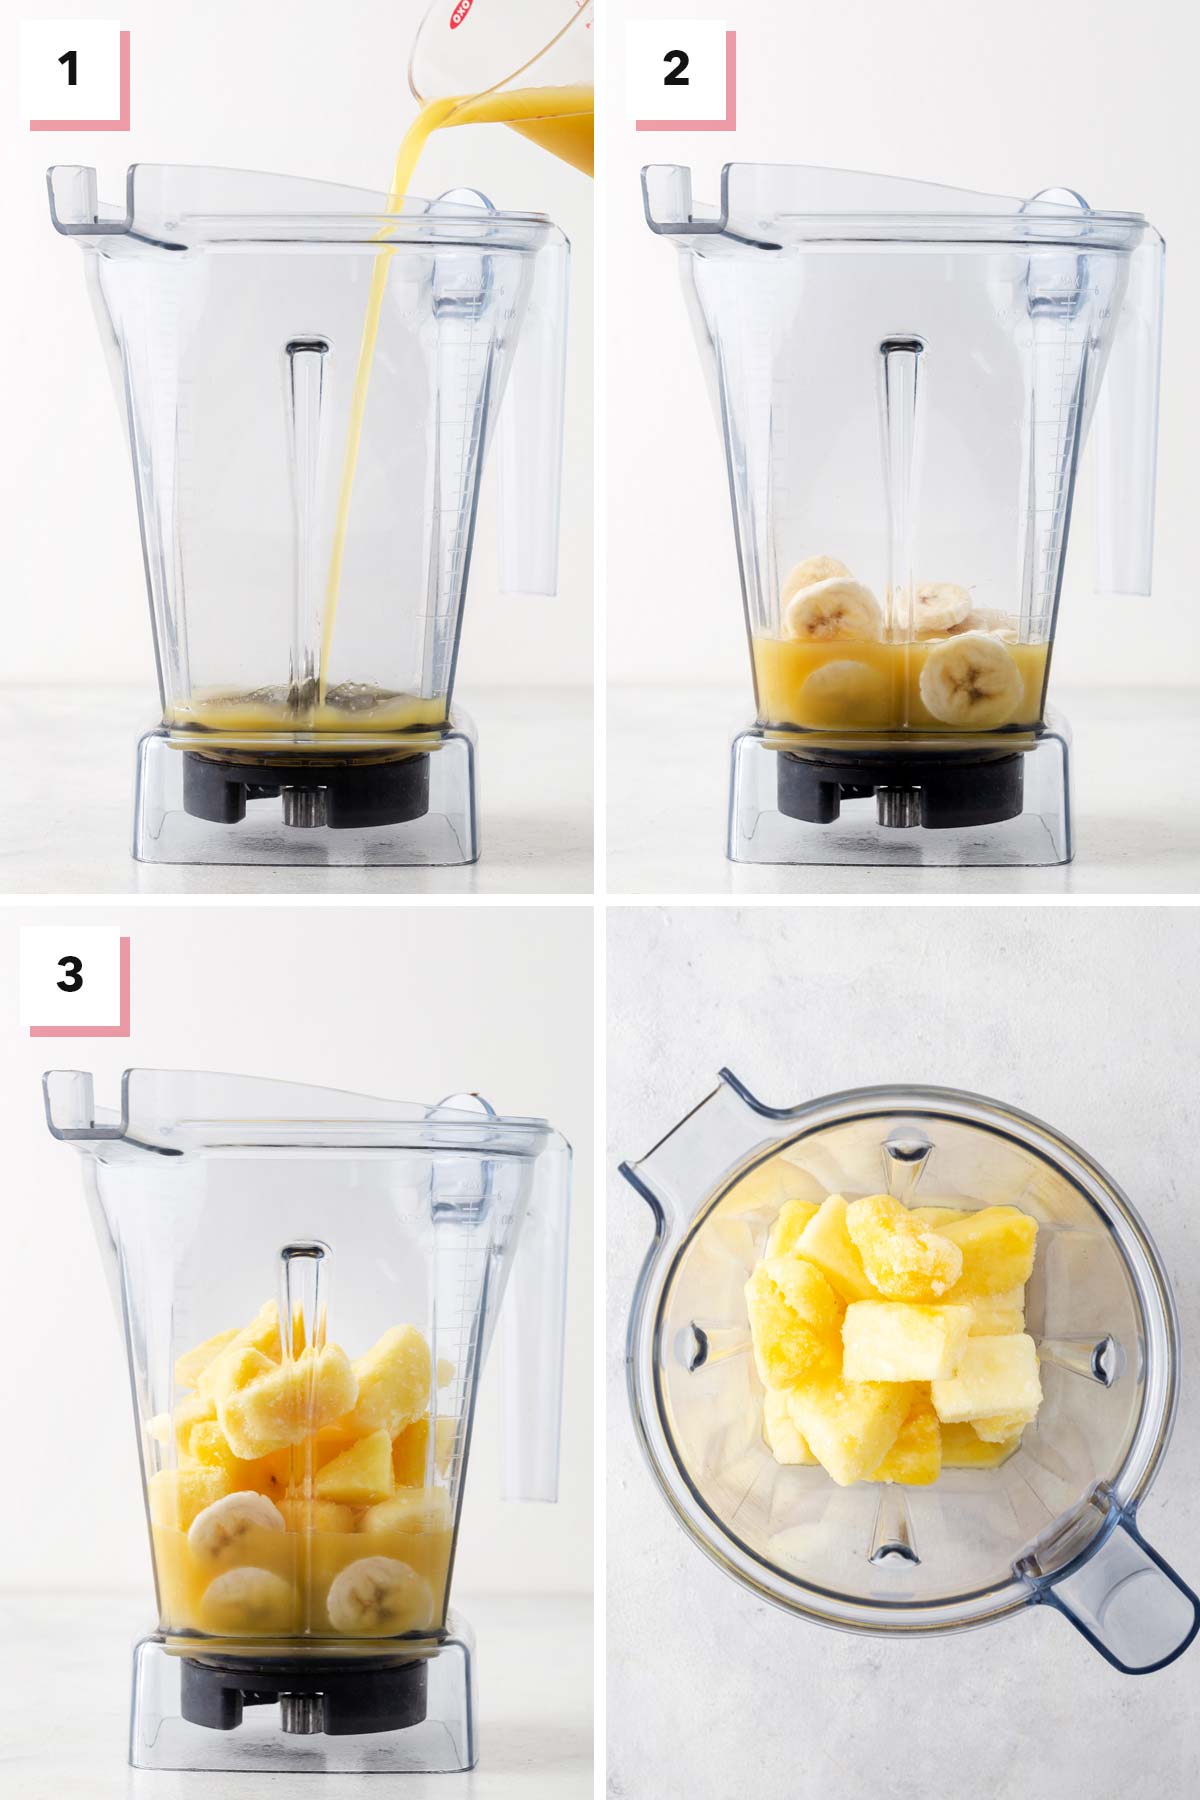 Steps for making a pineapple smoothie.